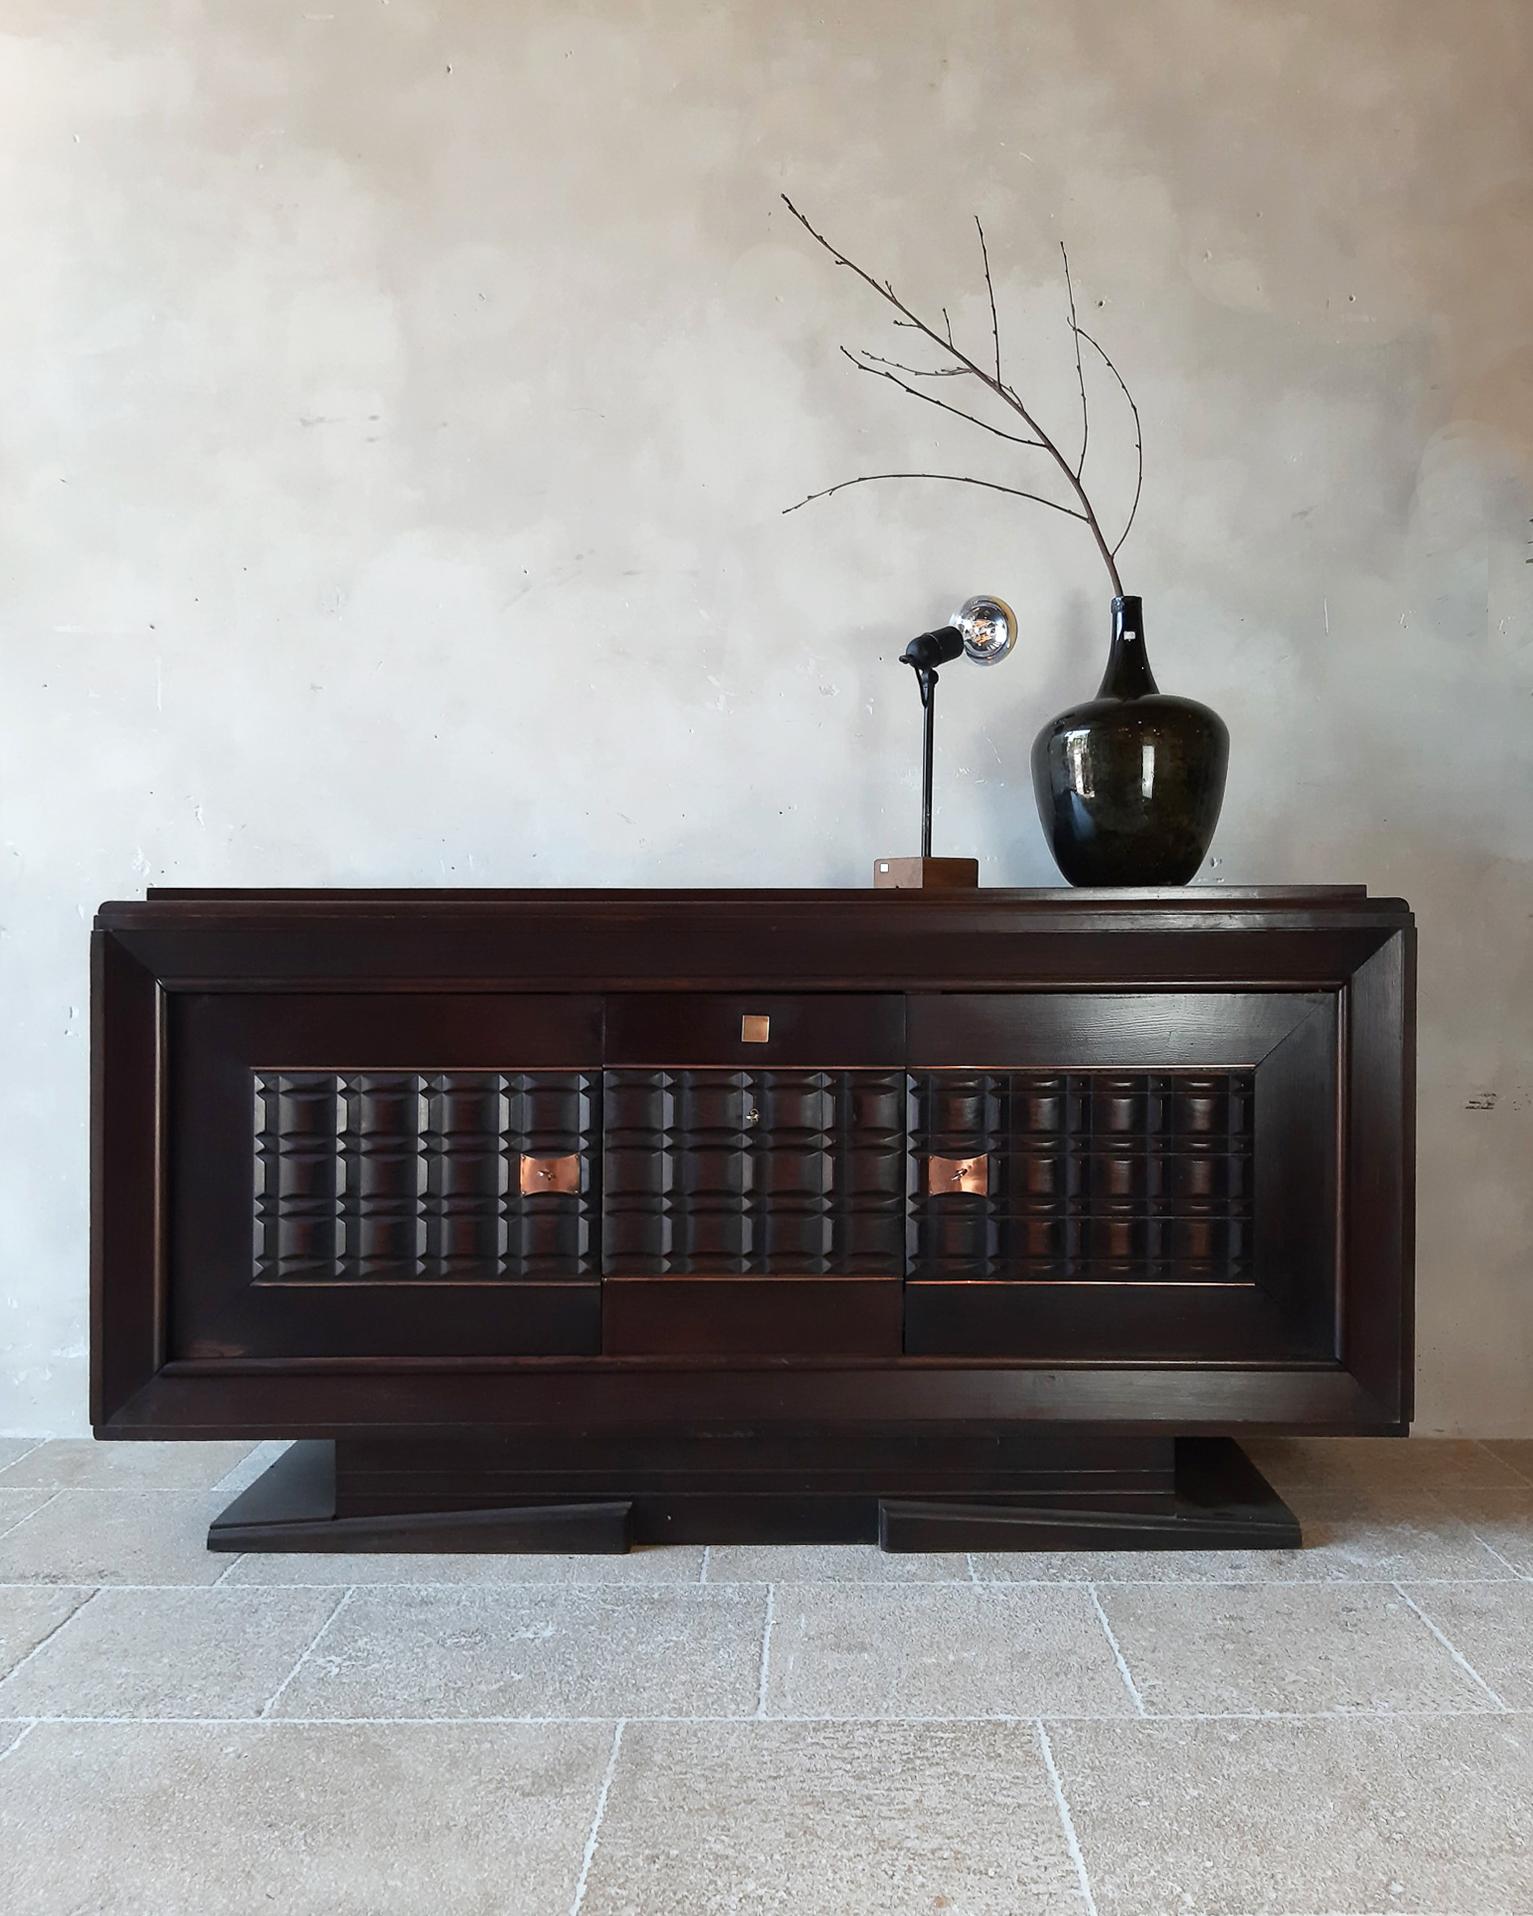 Vintage design sideboard by Charles Dudouyt in dark oak, 1940s-50s. The doors of this beautiful credenza are cut out in graphic and geometric shapes. With copper-coloured details.

Dimensions: H 100 x W 200 x D 54 cm.